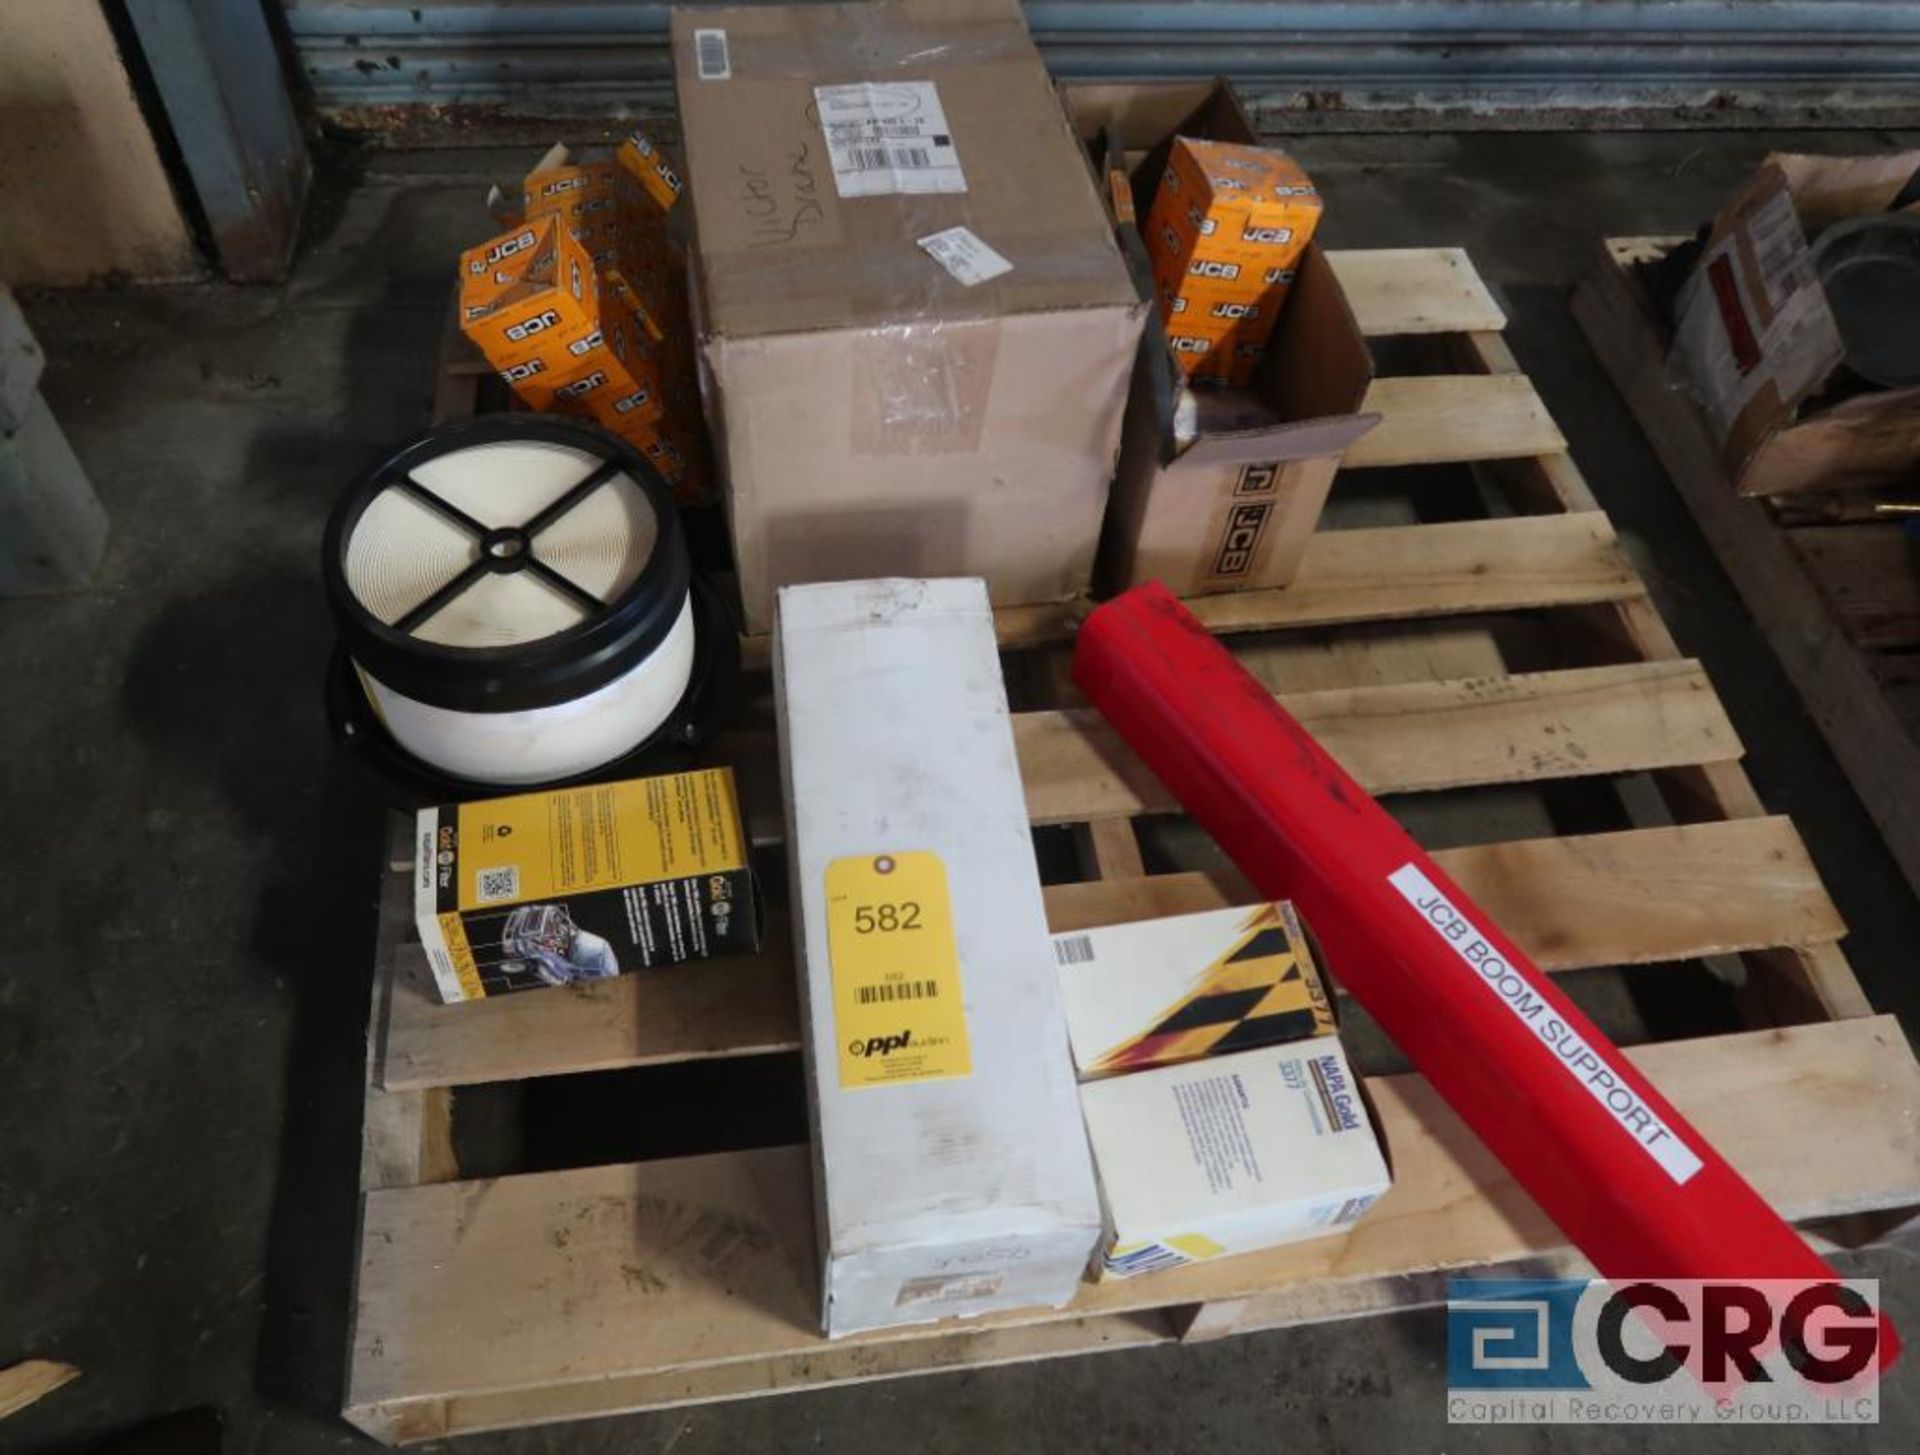 Lot of assorted JCB parts including belts, filters, and boom support (Maintenance Shop)